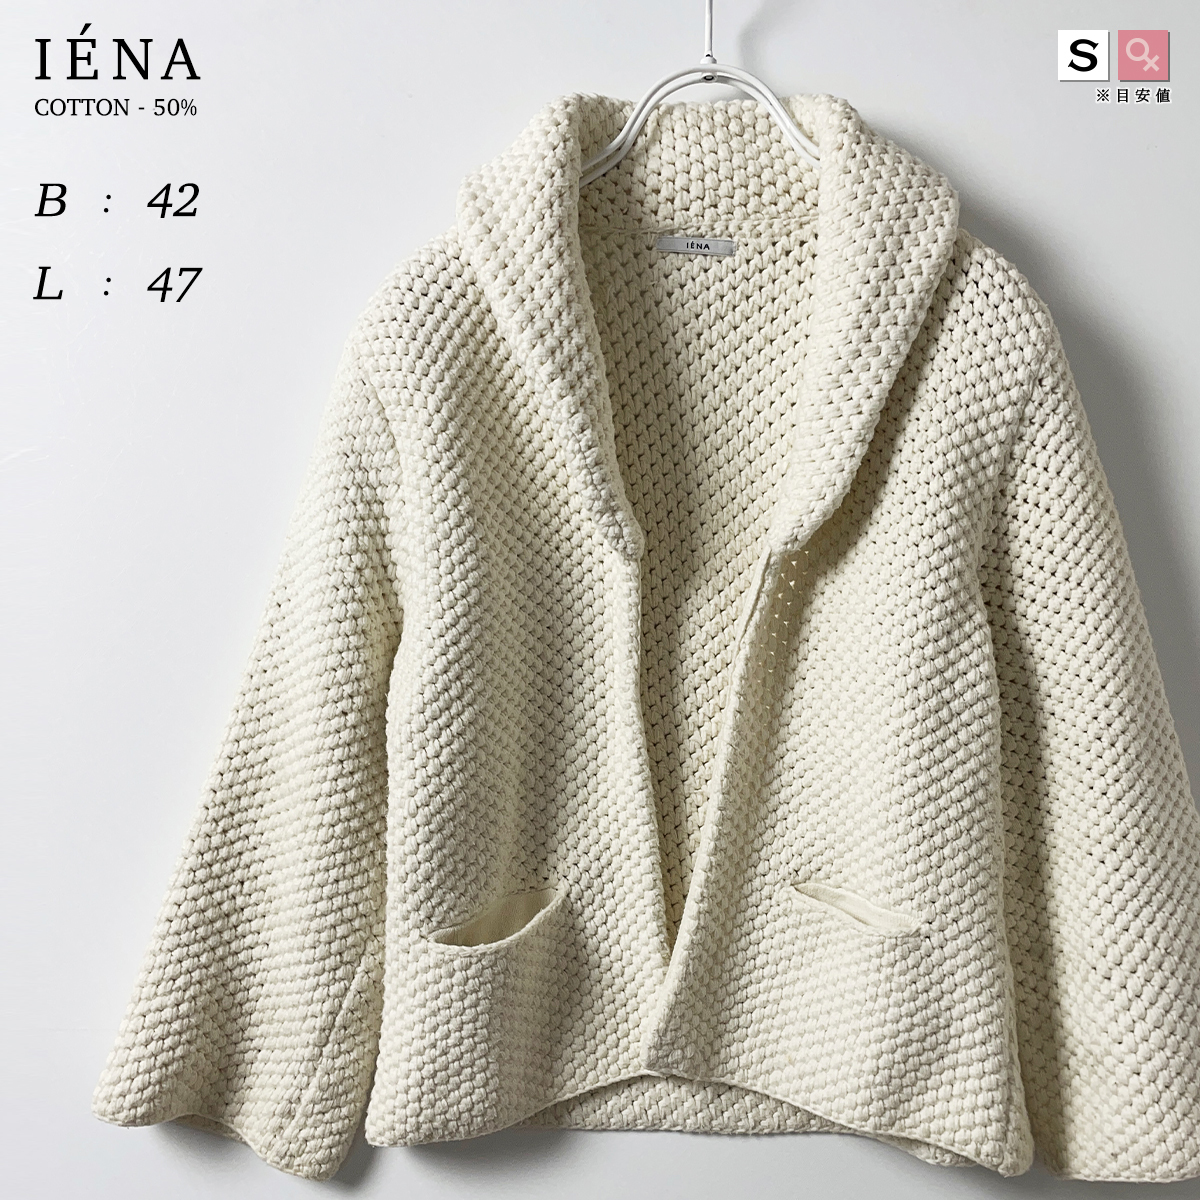 IENA Iena cotton low gauge knitted bolero thick 7 part sleeve cardigan white ivory eggshell white collar attaching .... jacket spring autumn S 7 number 